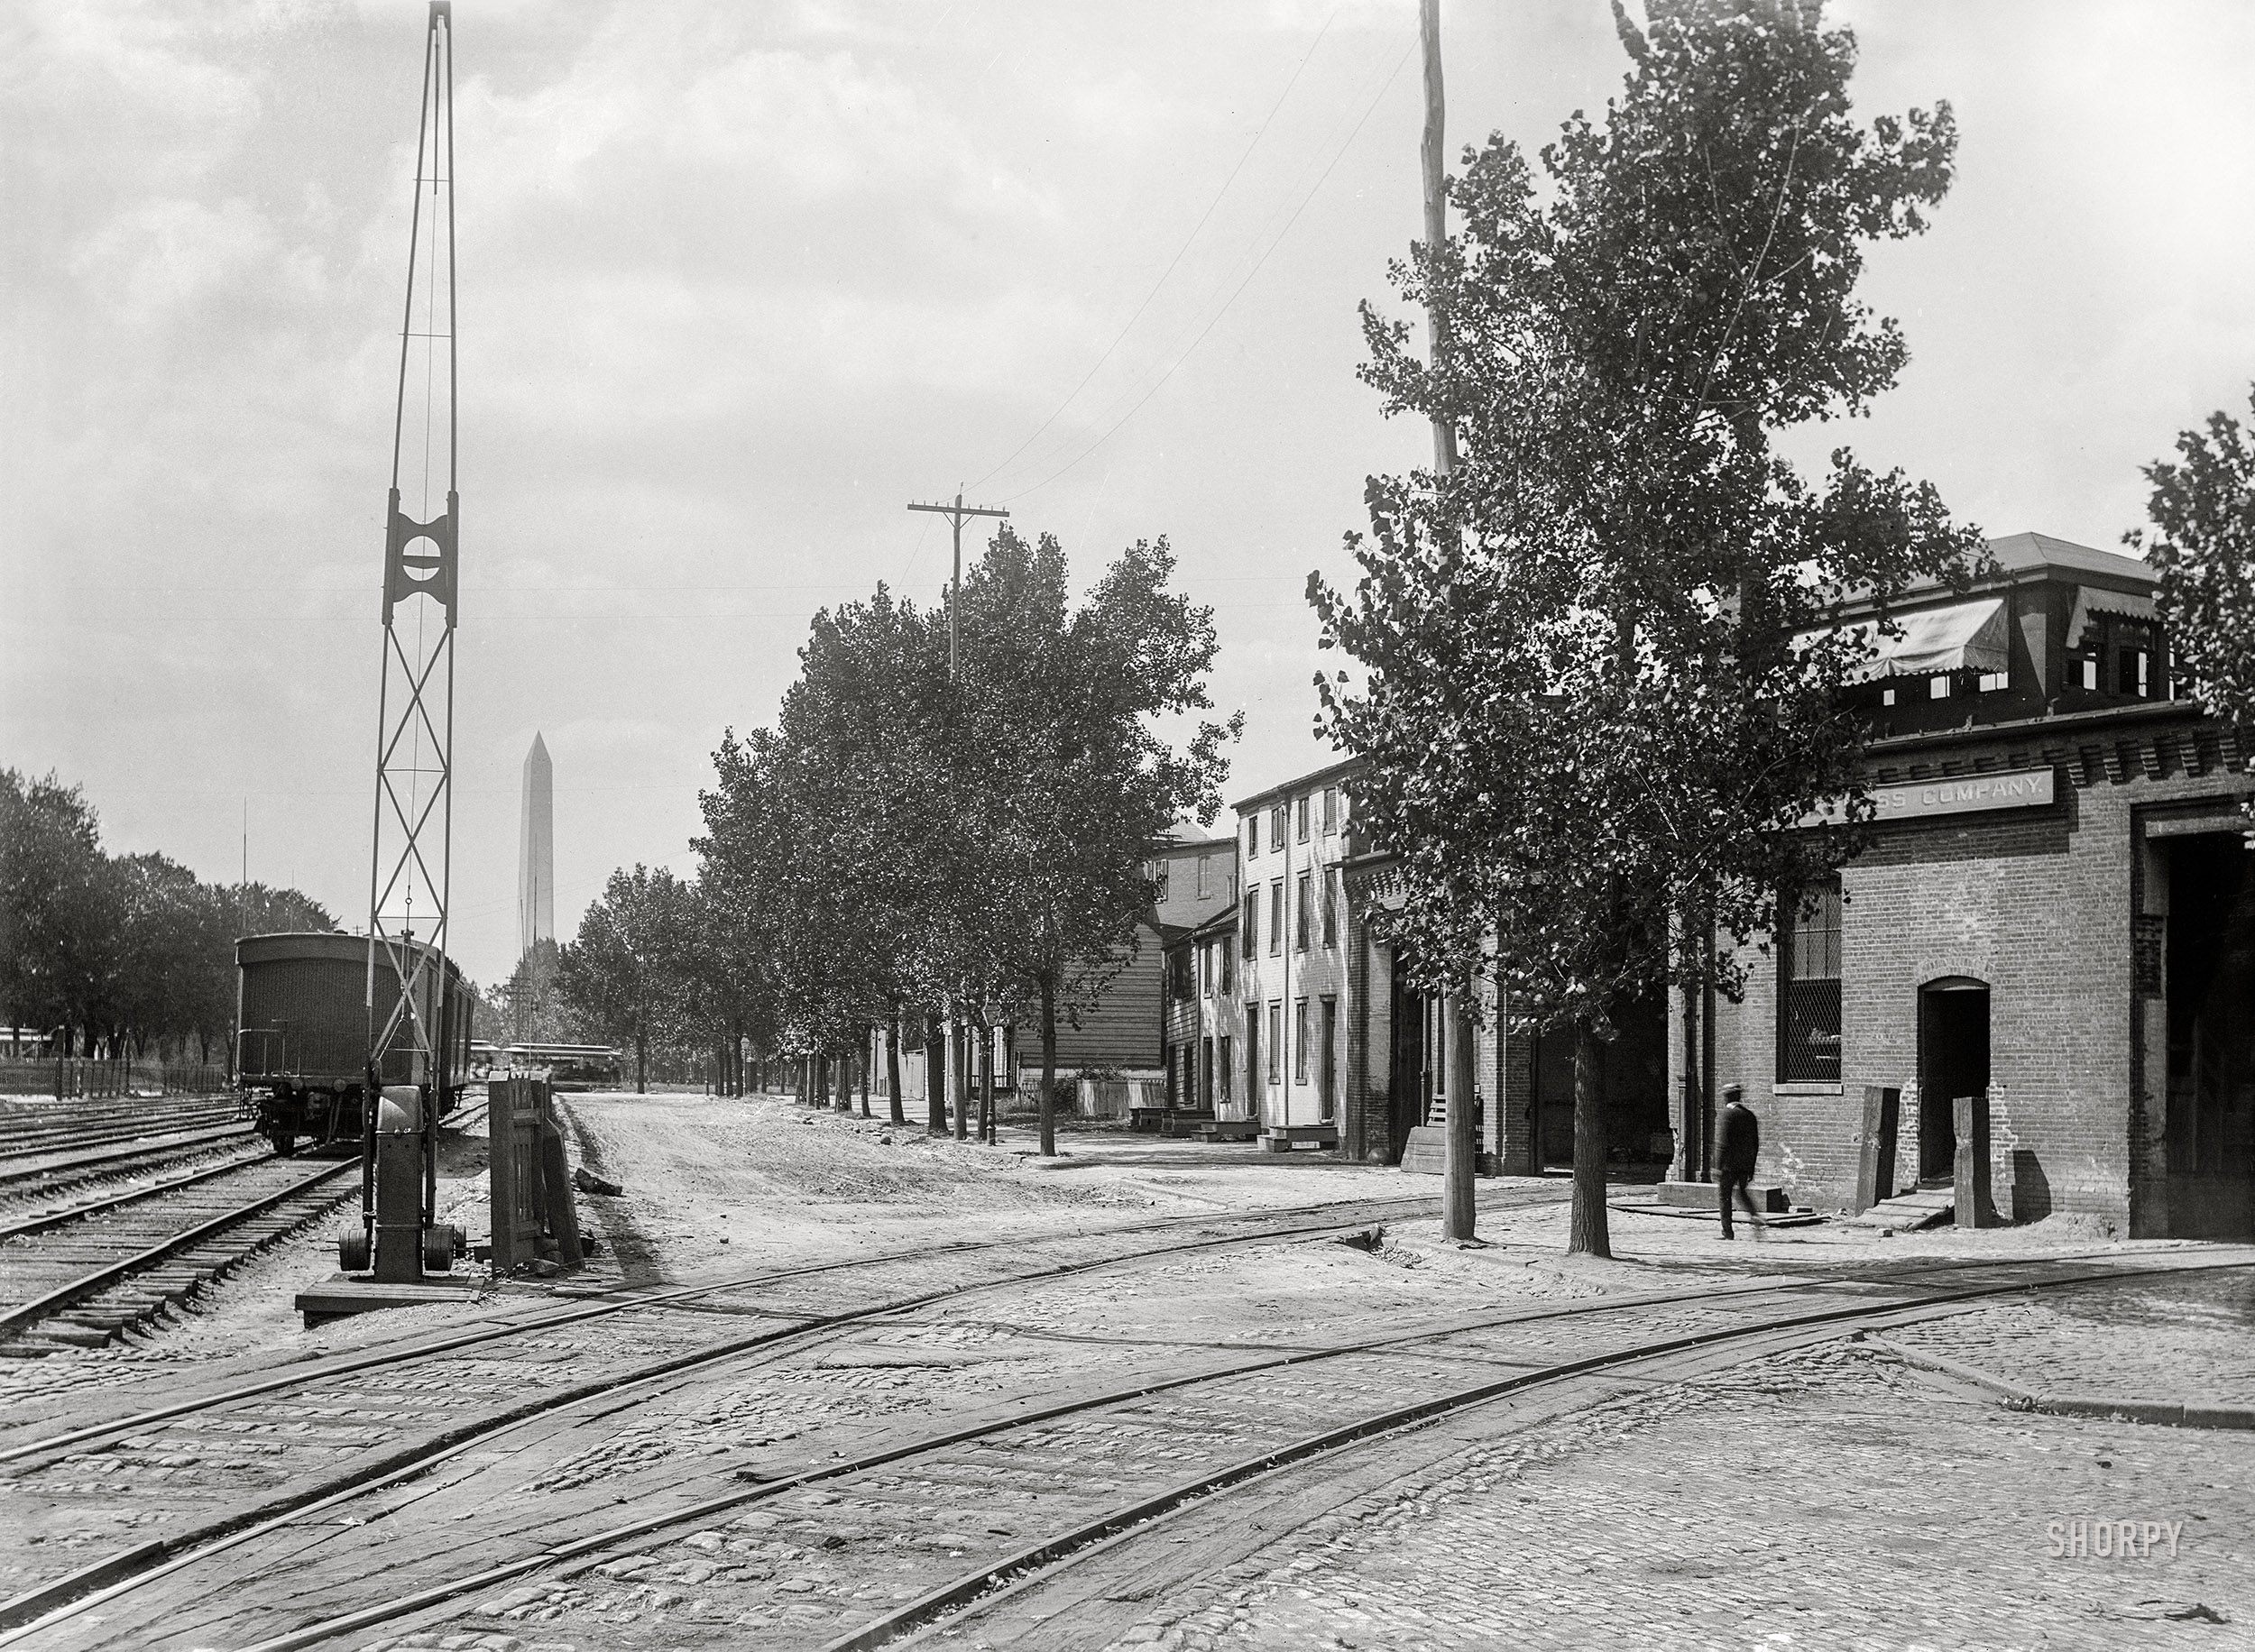 Washington, D.C., circa 1901. "Virginia Avenue at Sixth Street S.W., showing street and railroad tracks in the foreground near the Adams Express Co., and the Washington Monument in the distance." 5x7 inch glass negative, D.C. Street Survey Collection. View full size.